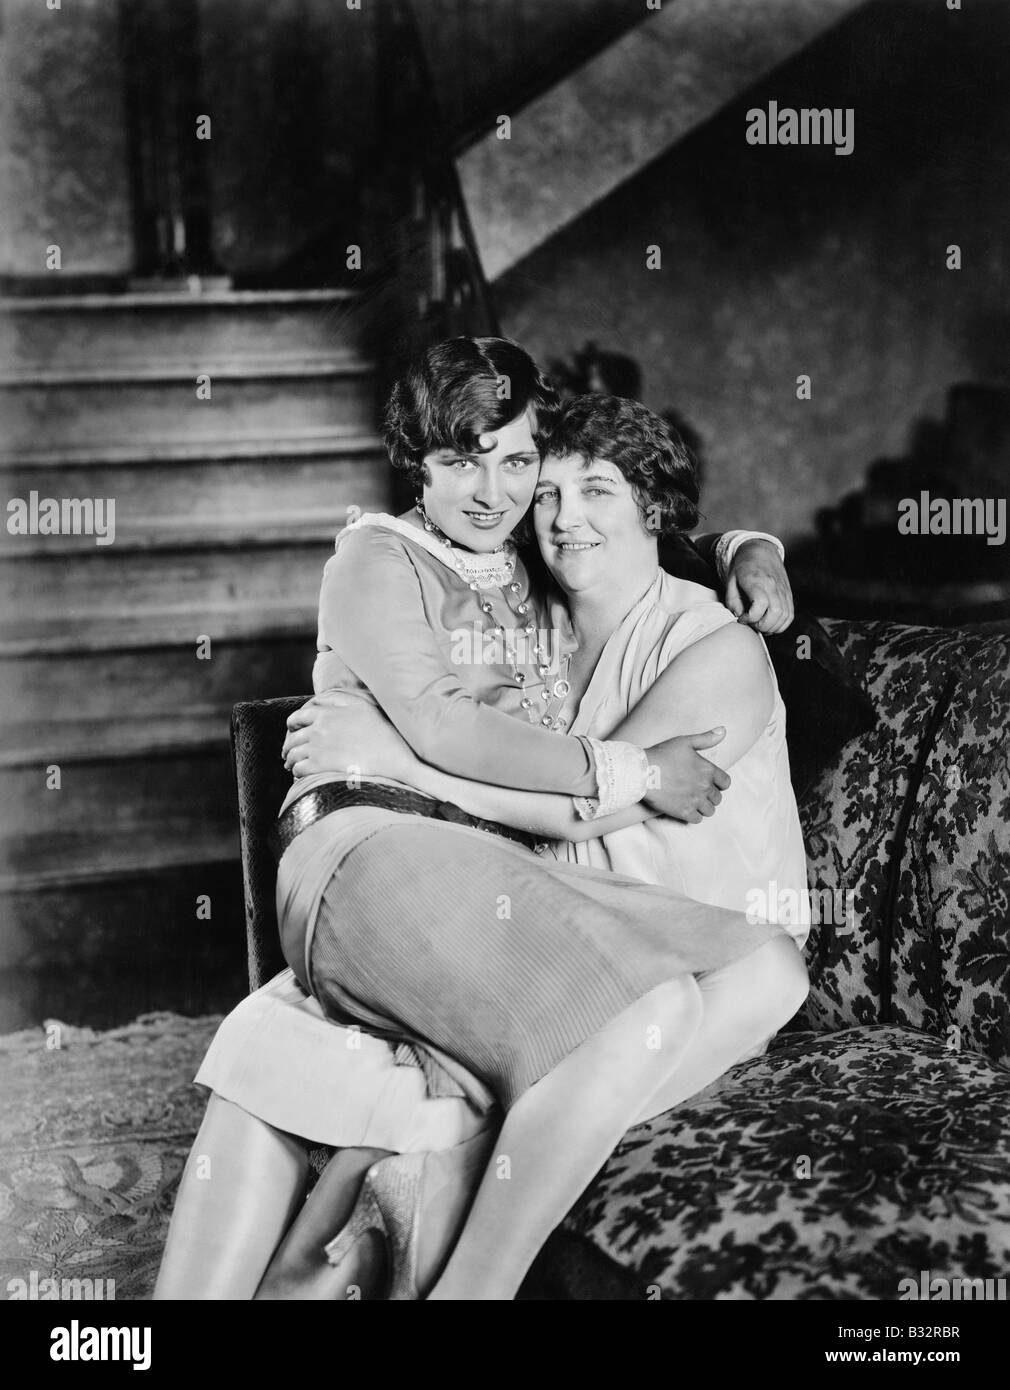 Two women sitting together on the other's lap Stock Photo